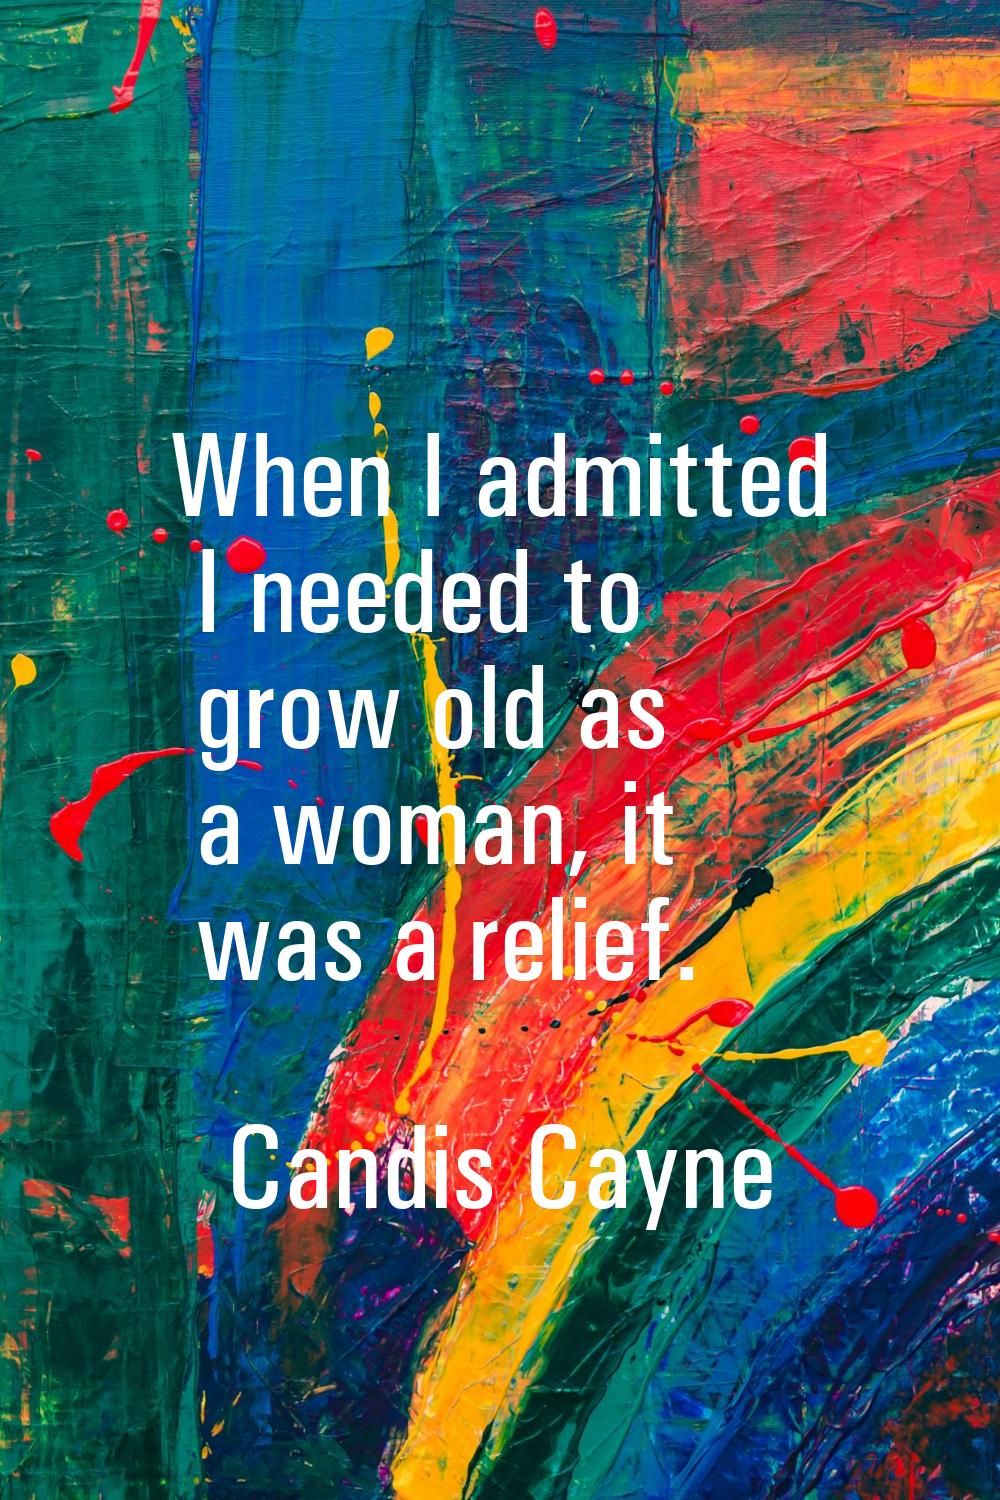 When I admitted I needed to grow old as a woman, it was a relief.